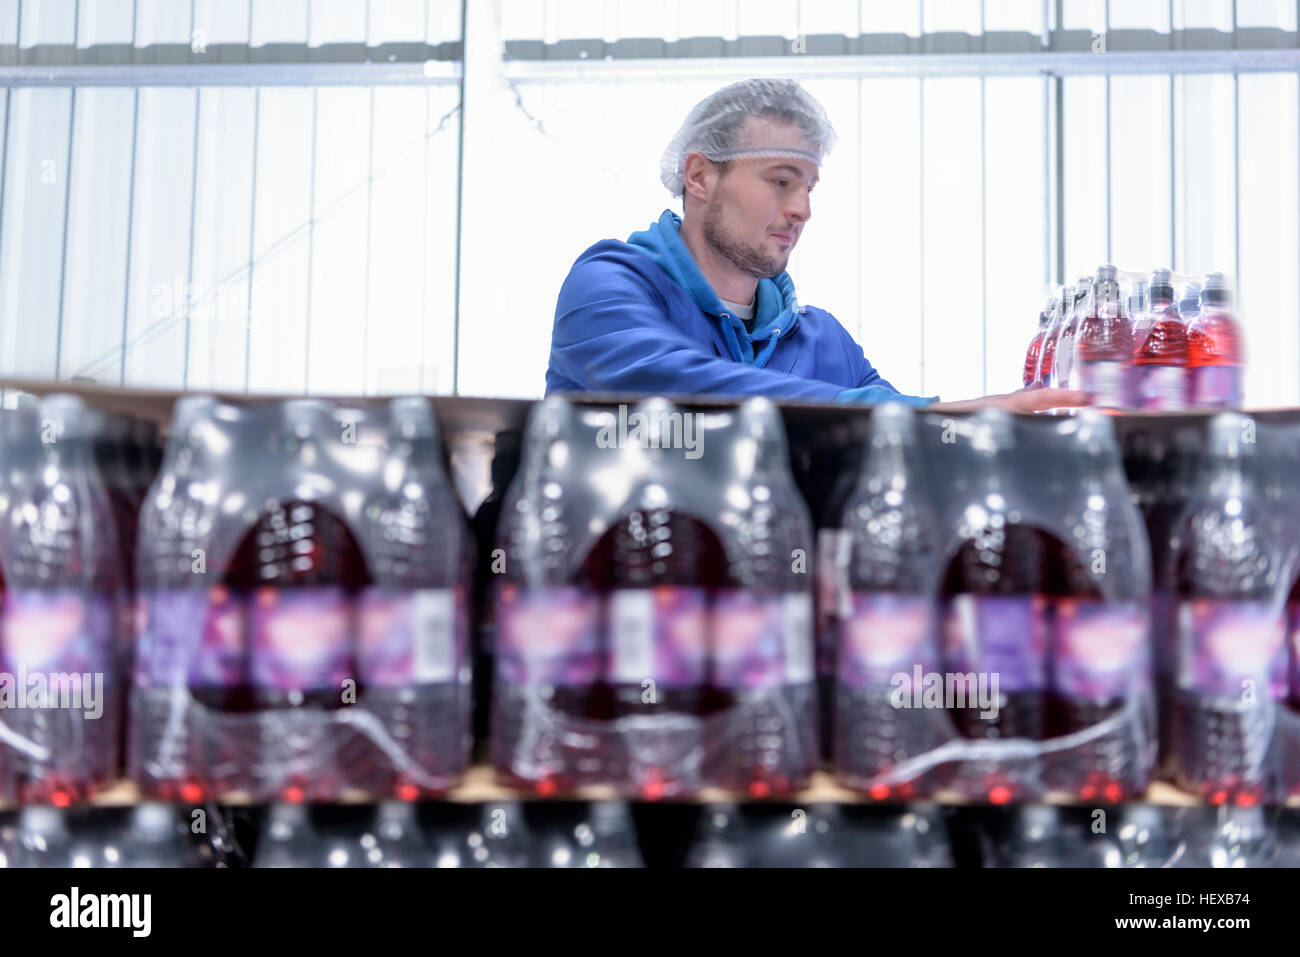 Worker packing flavoured water bottles in spring water factory Stock Photo